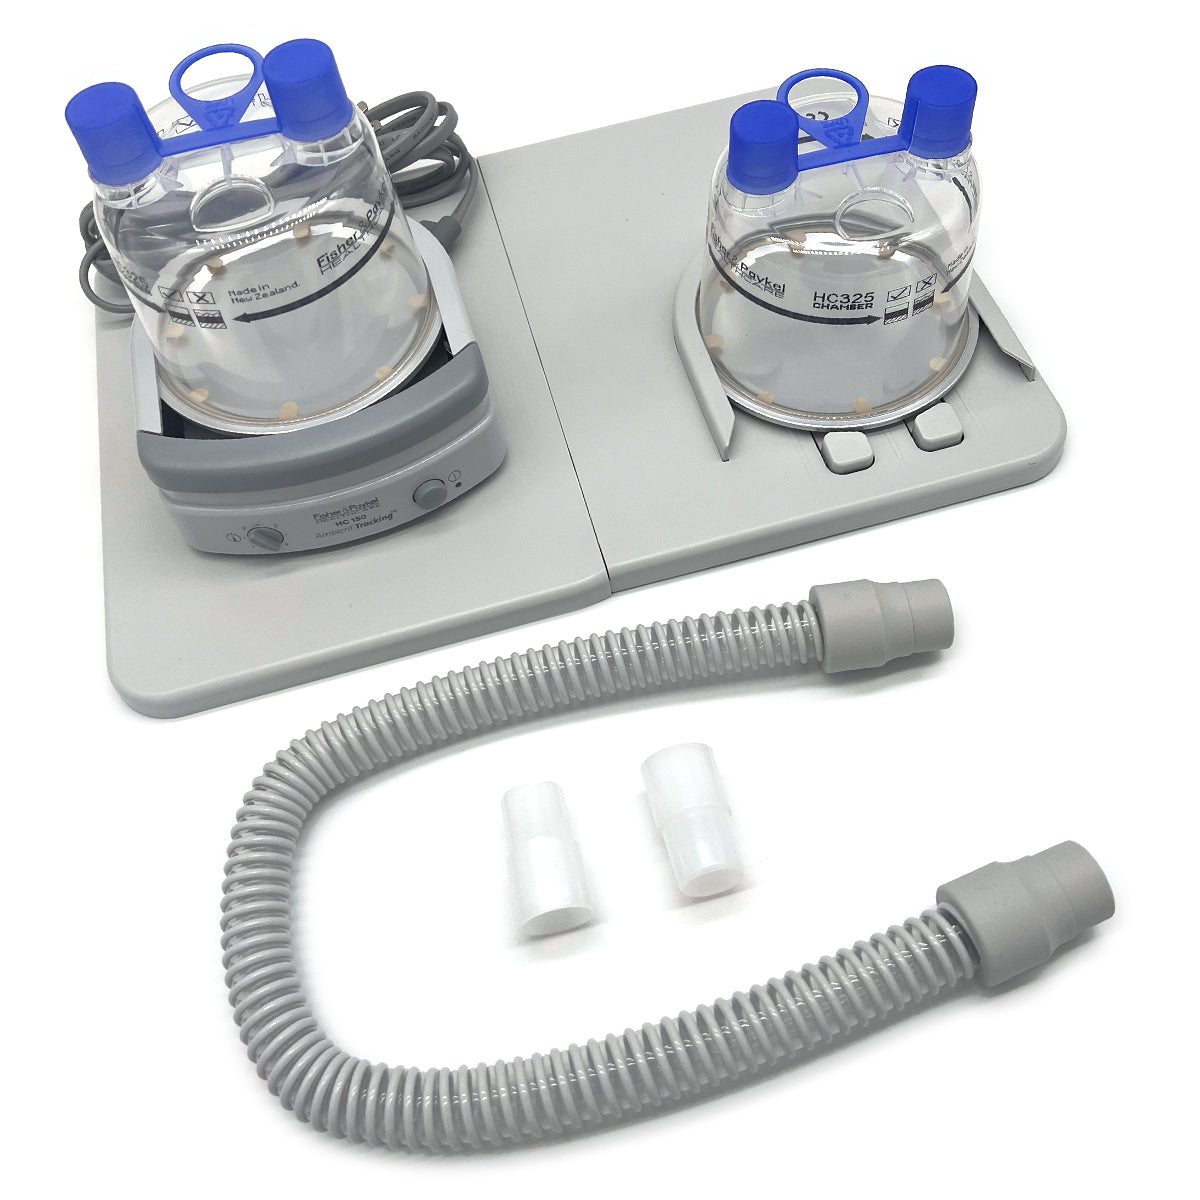 HC150 Heated Humidifier Kit for CPAP/BiPAP Therapy (with Tubing, 2 Chambers & Stand)